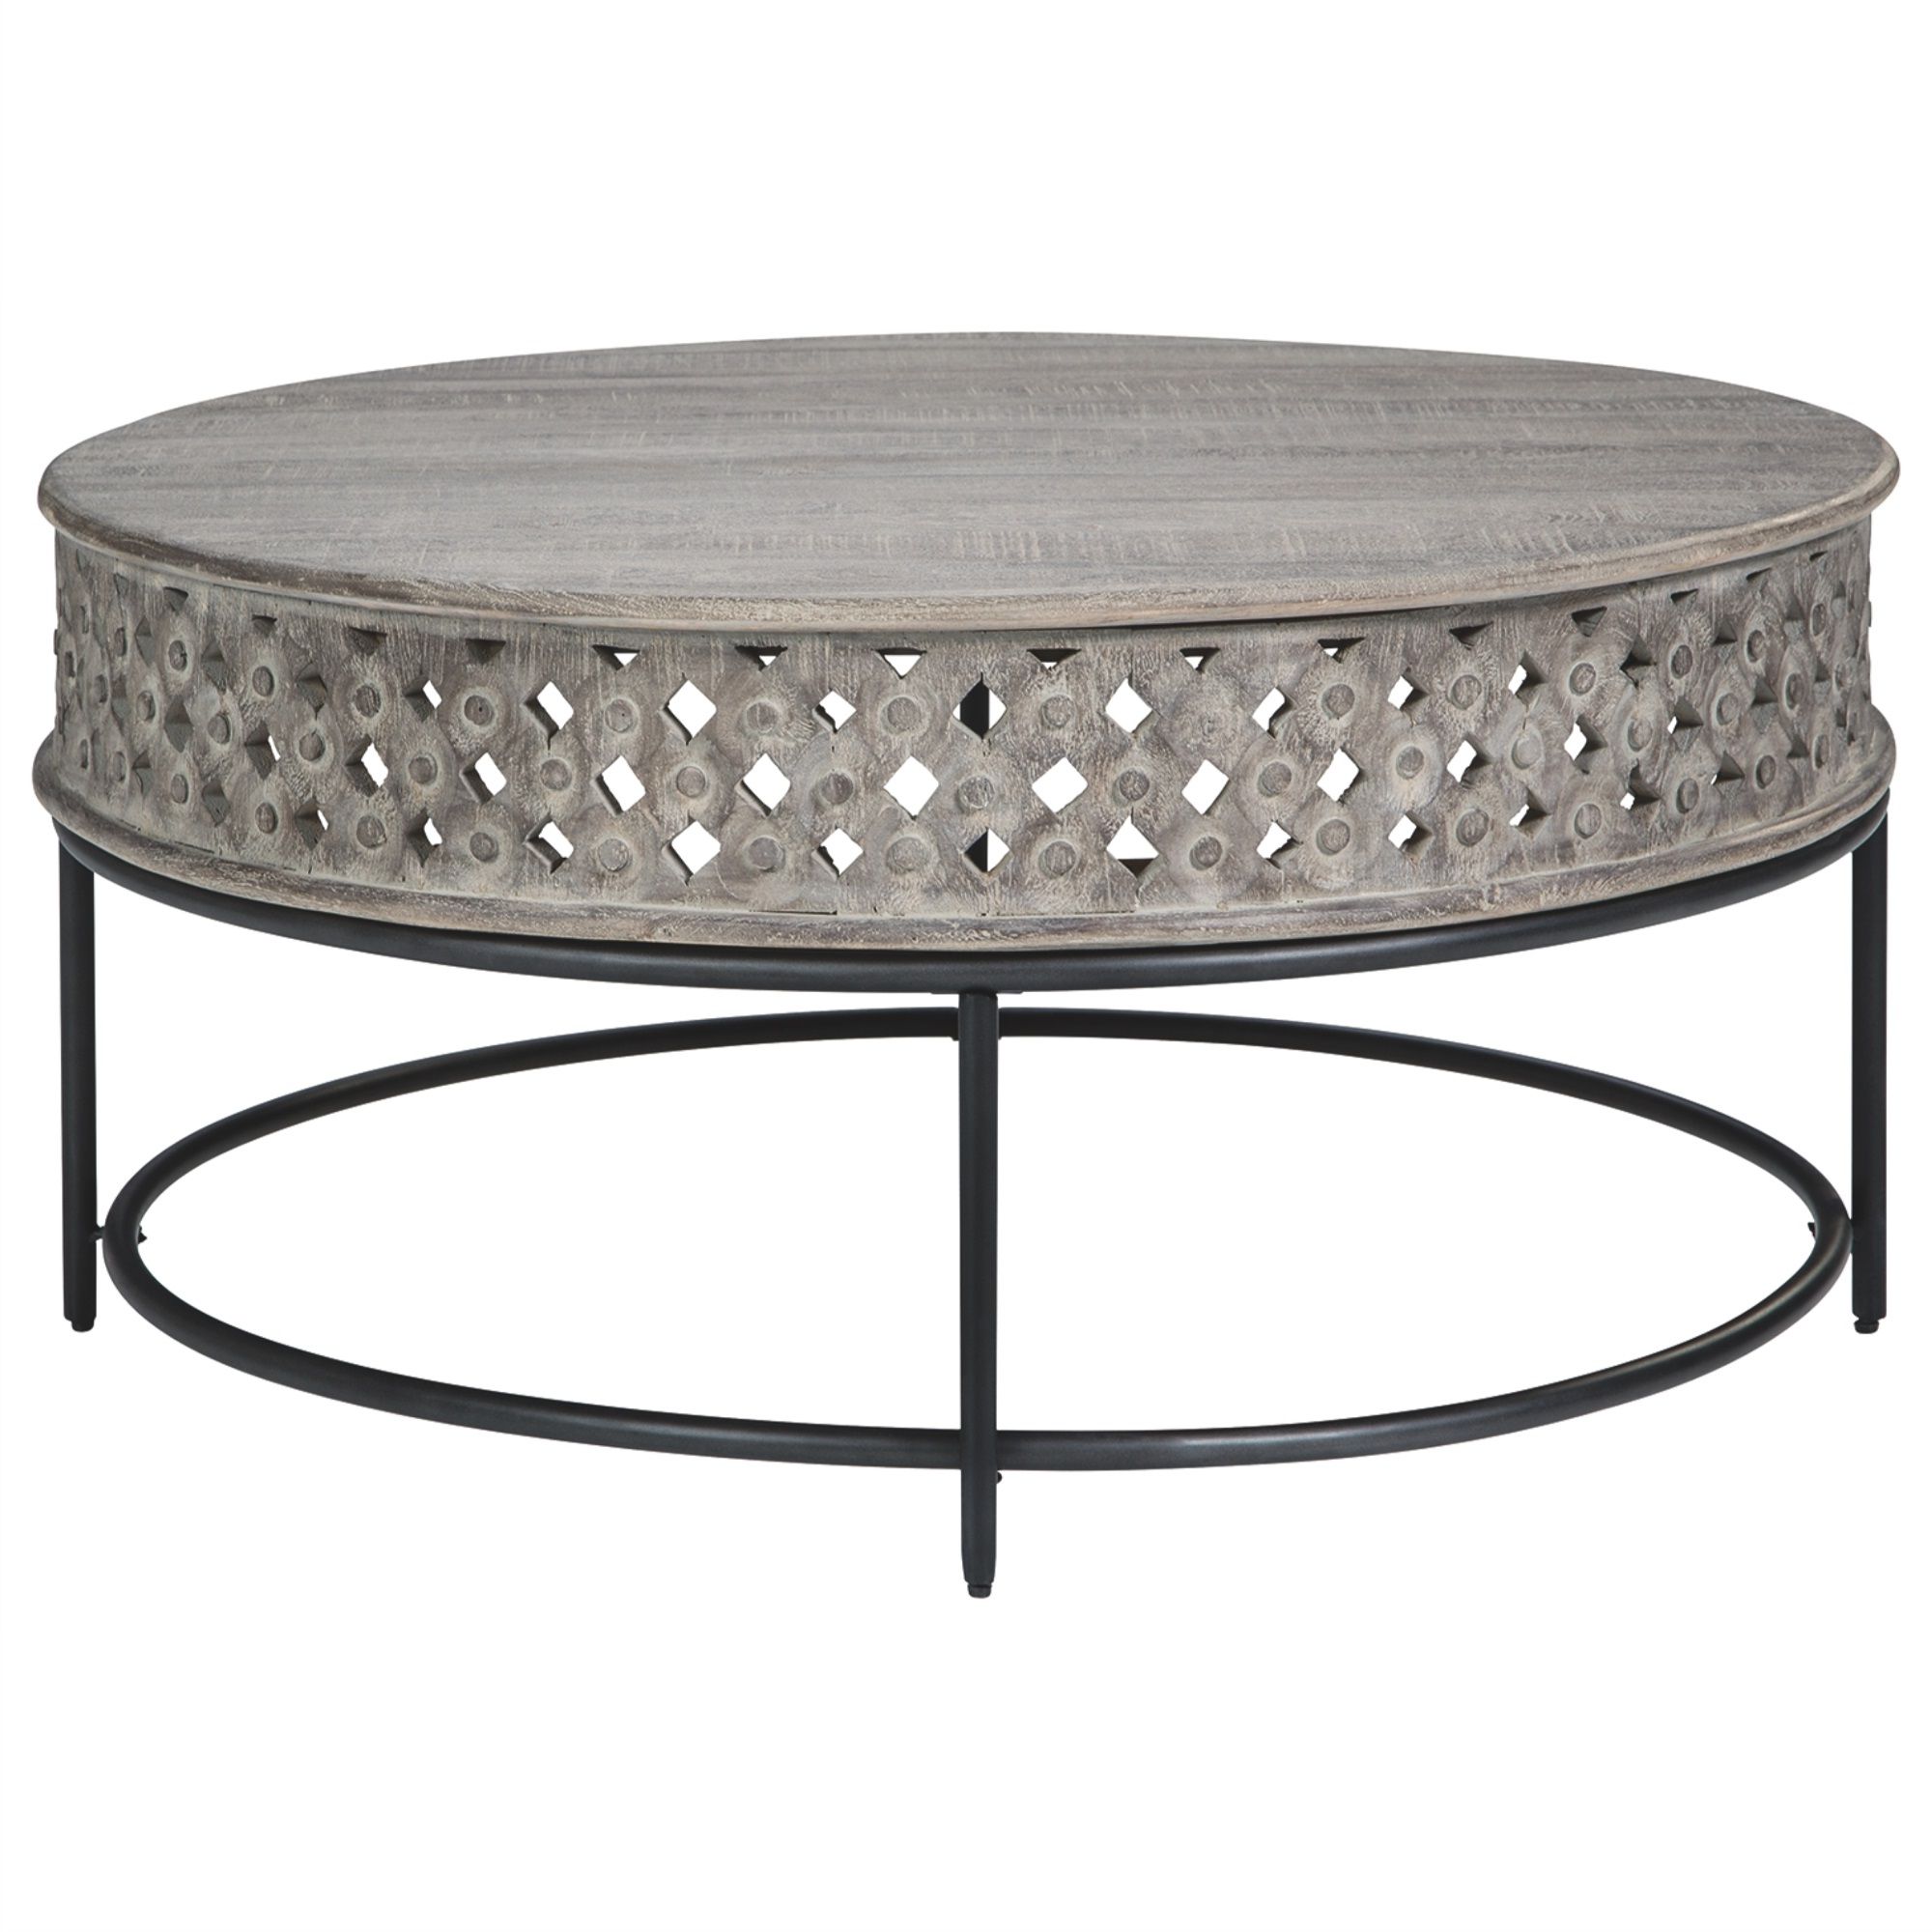 Fashionable Gray Wood Veneer Cocktail Tables Throughout Wooden Round Cocktail Table With Hand Carved Lattice (Gallery 16 of 20)